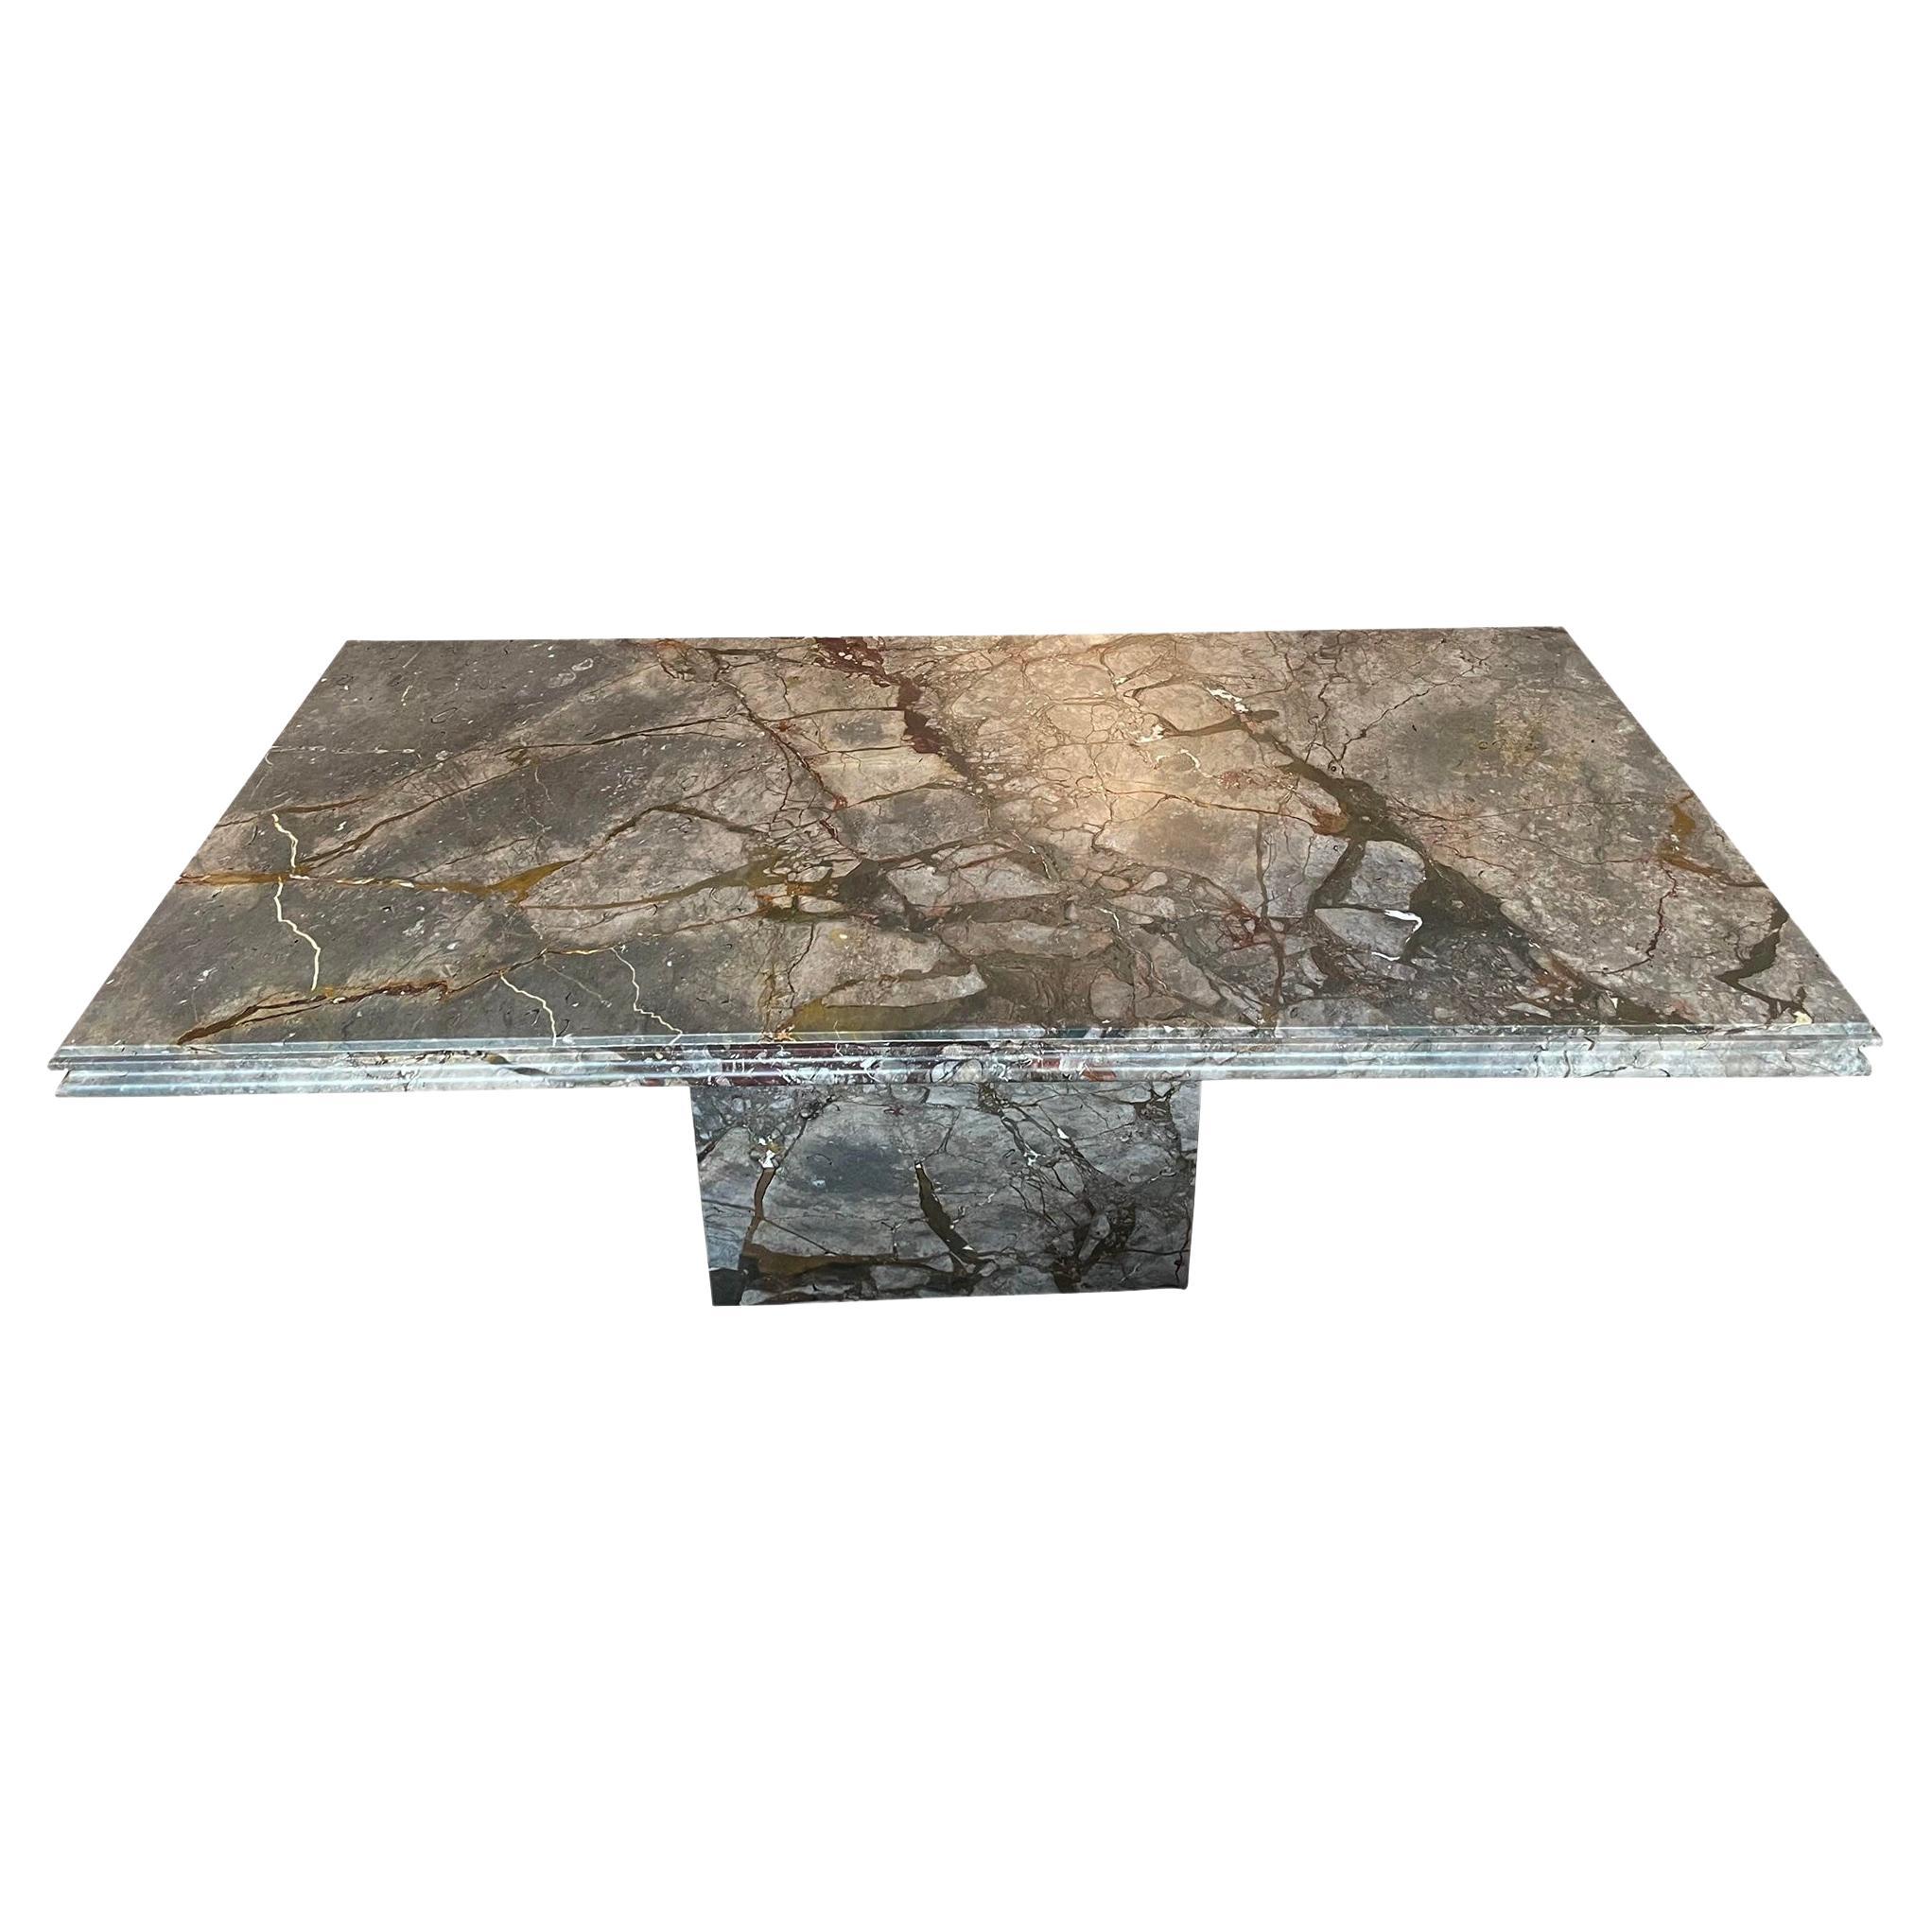 Absolutely stunning dining table in Emperado Marble. I’ve never seen a slab like this! It was lacquered - which was professionally removed so now it’s an organic honed finish which i love. The base also has dramatic veining on one